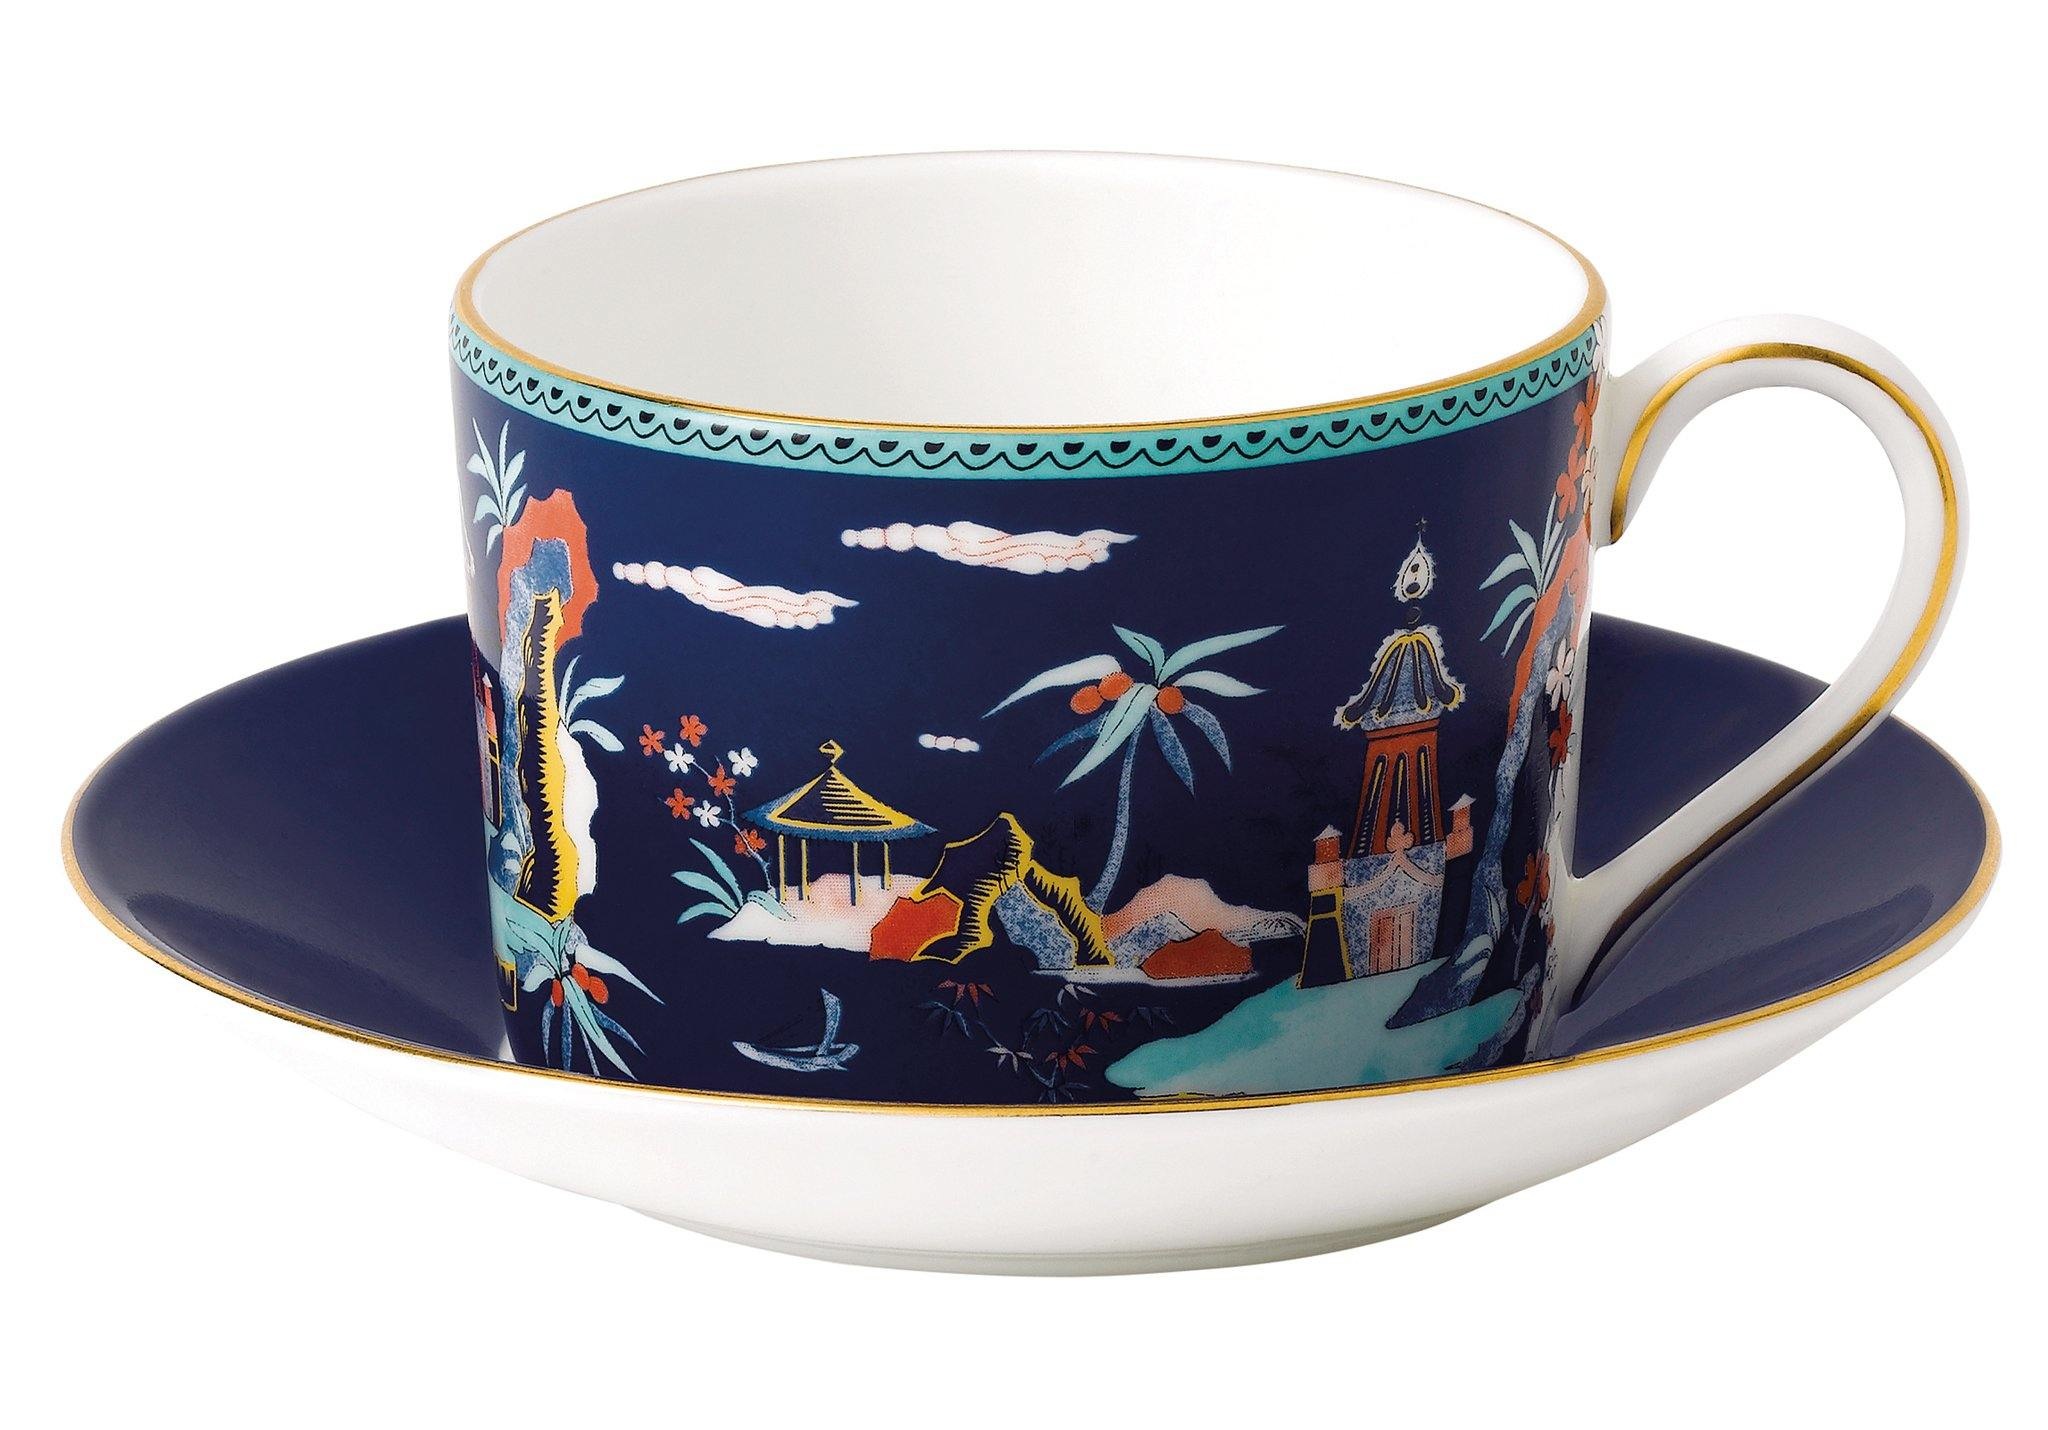 Enchanting Whimsical Tea Cup Patterns